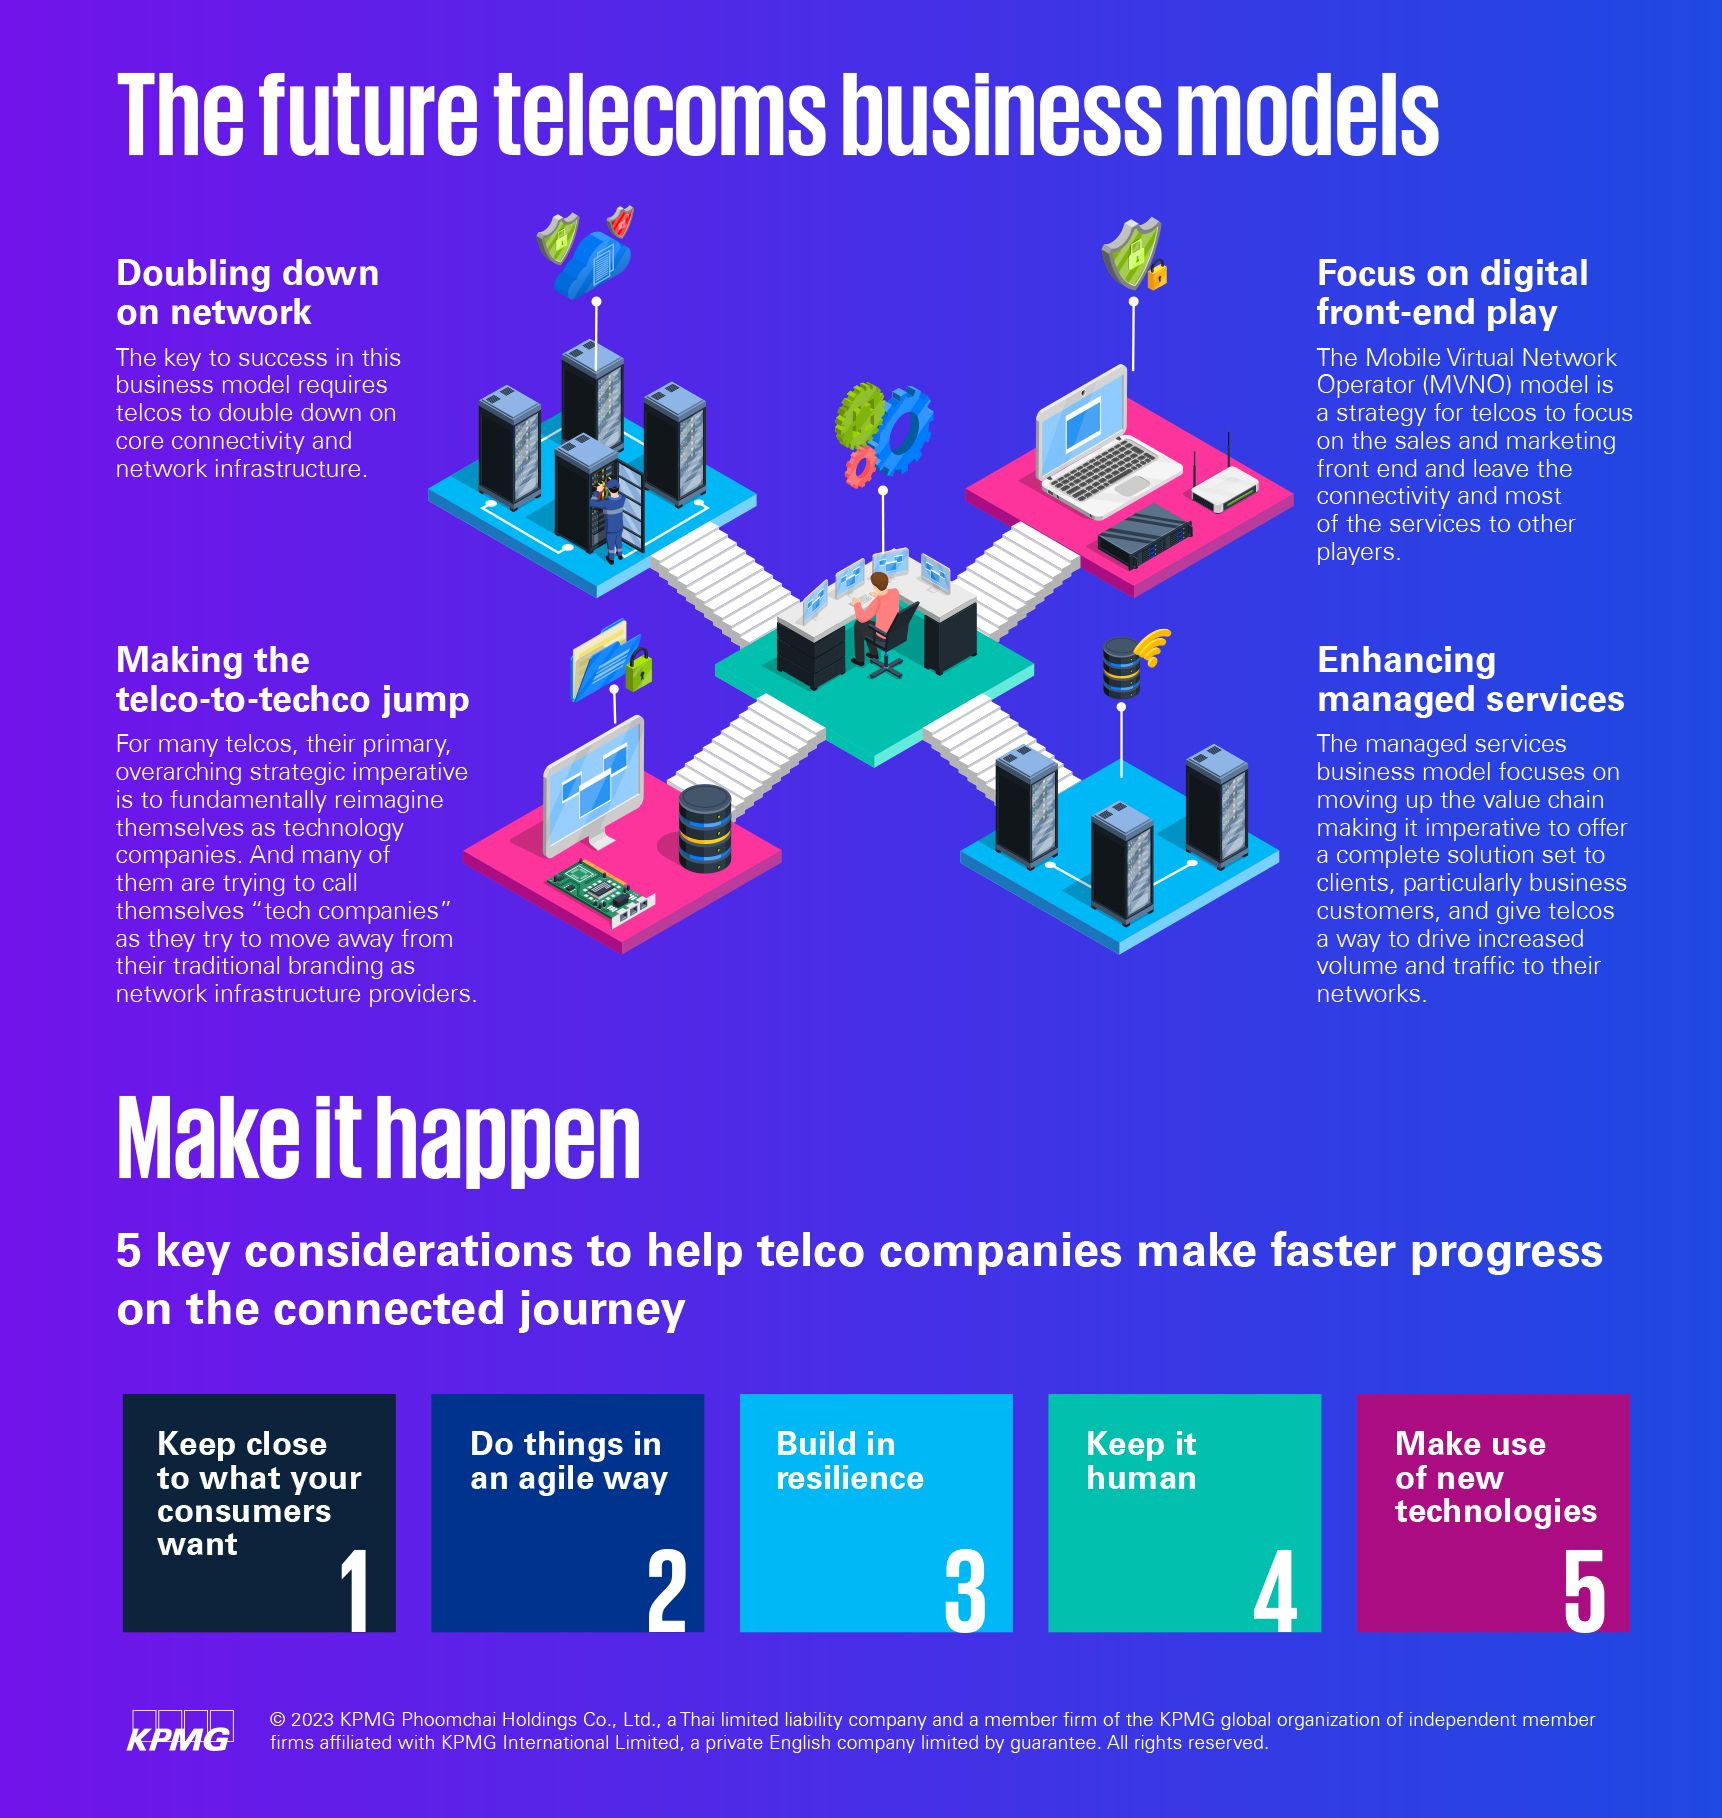 The future telecoms business models